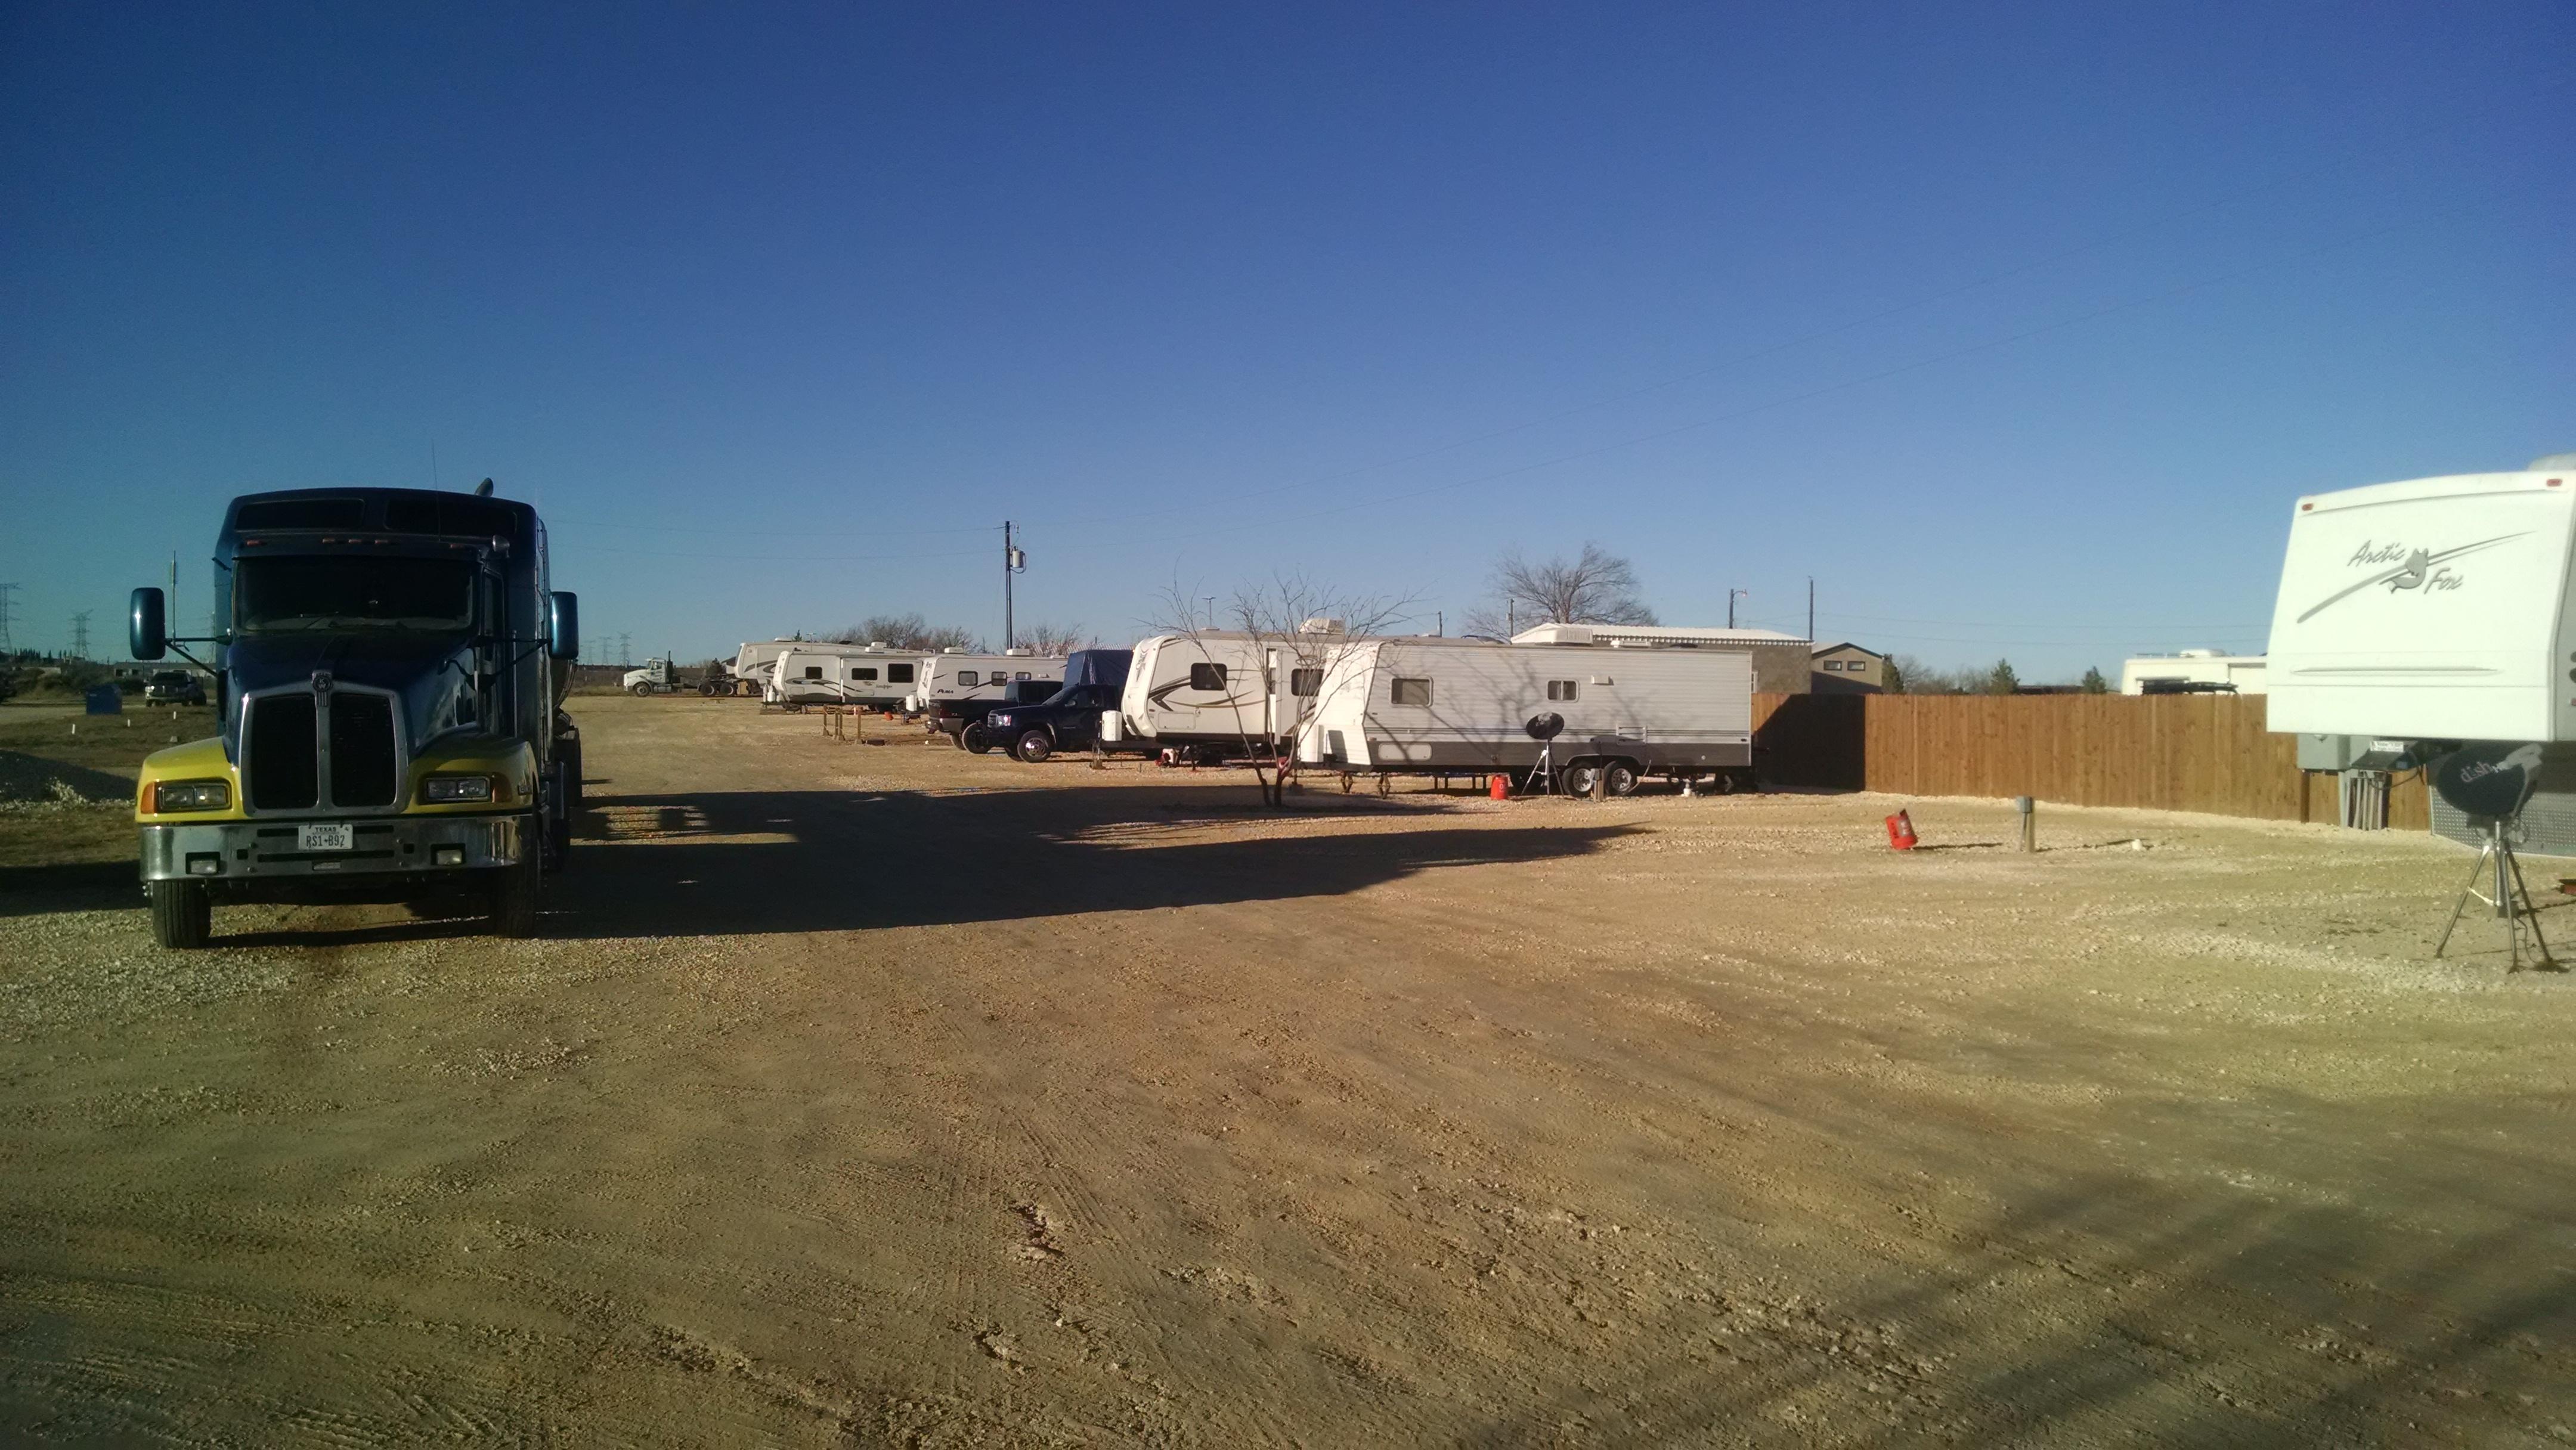 How to build an rv park in texas